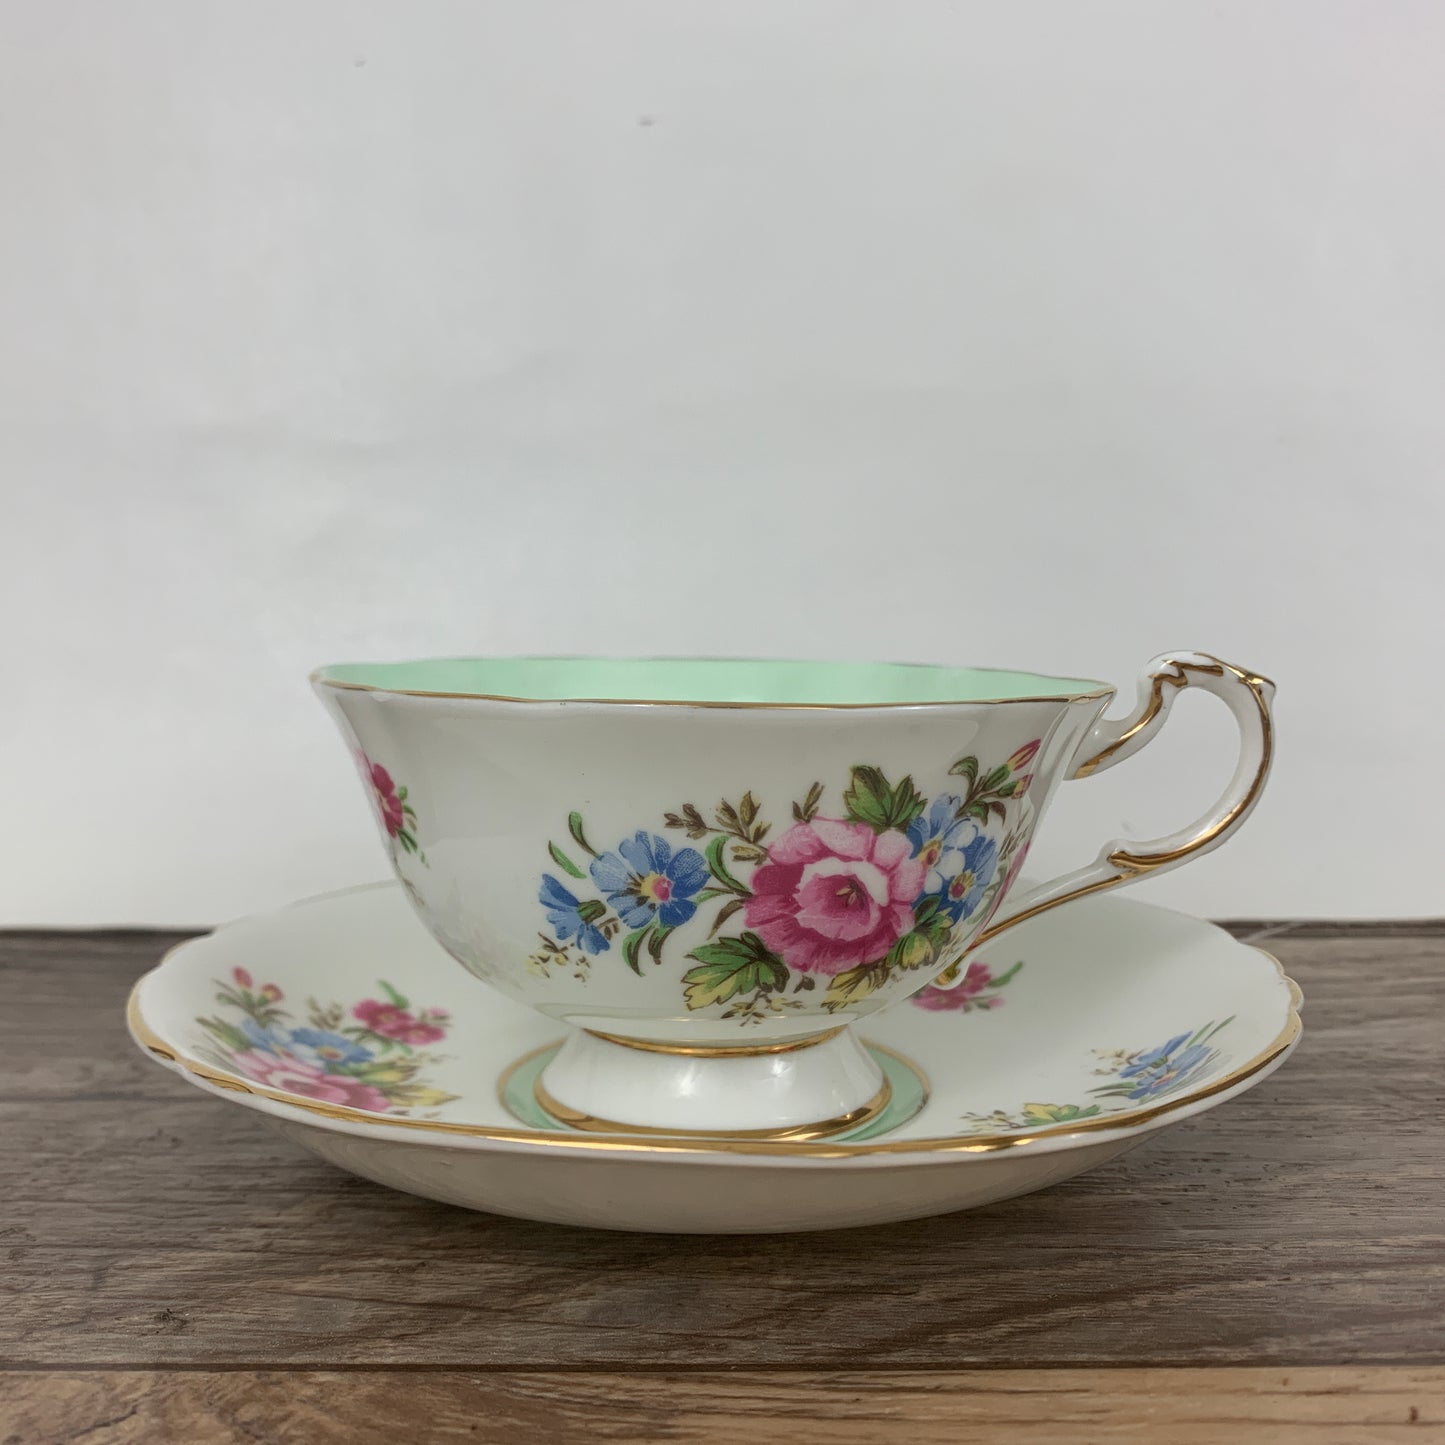 Vintage Paragon Teacup, White and Mint Green Double Warrant English Tea Cup